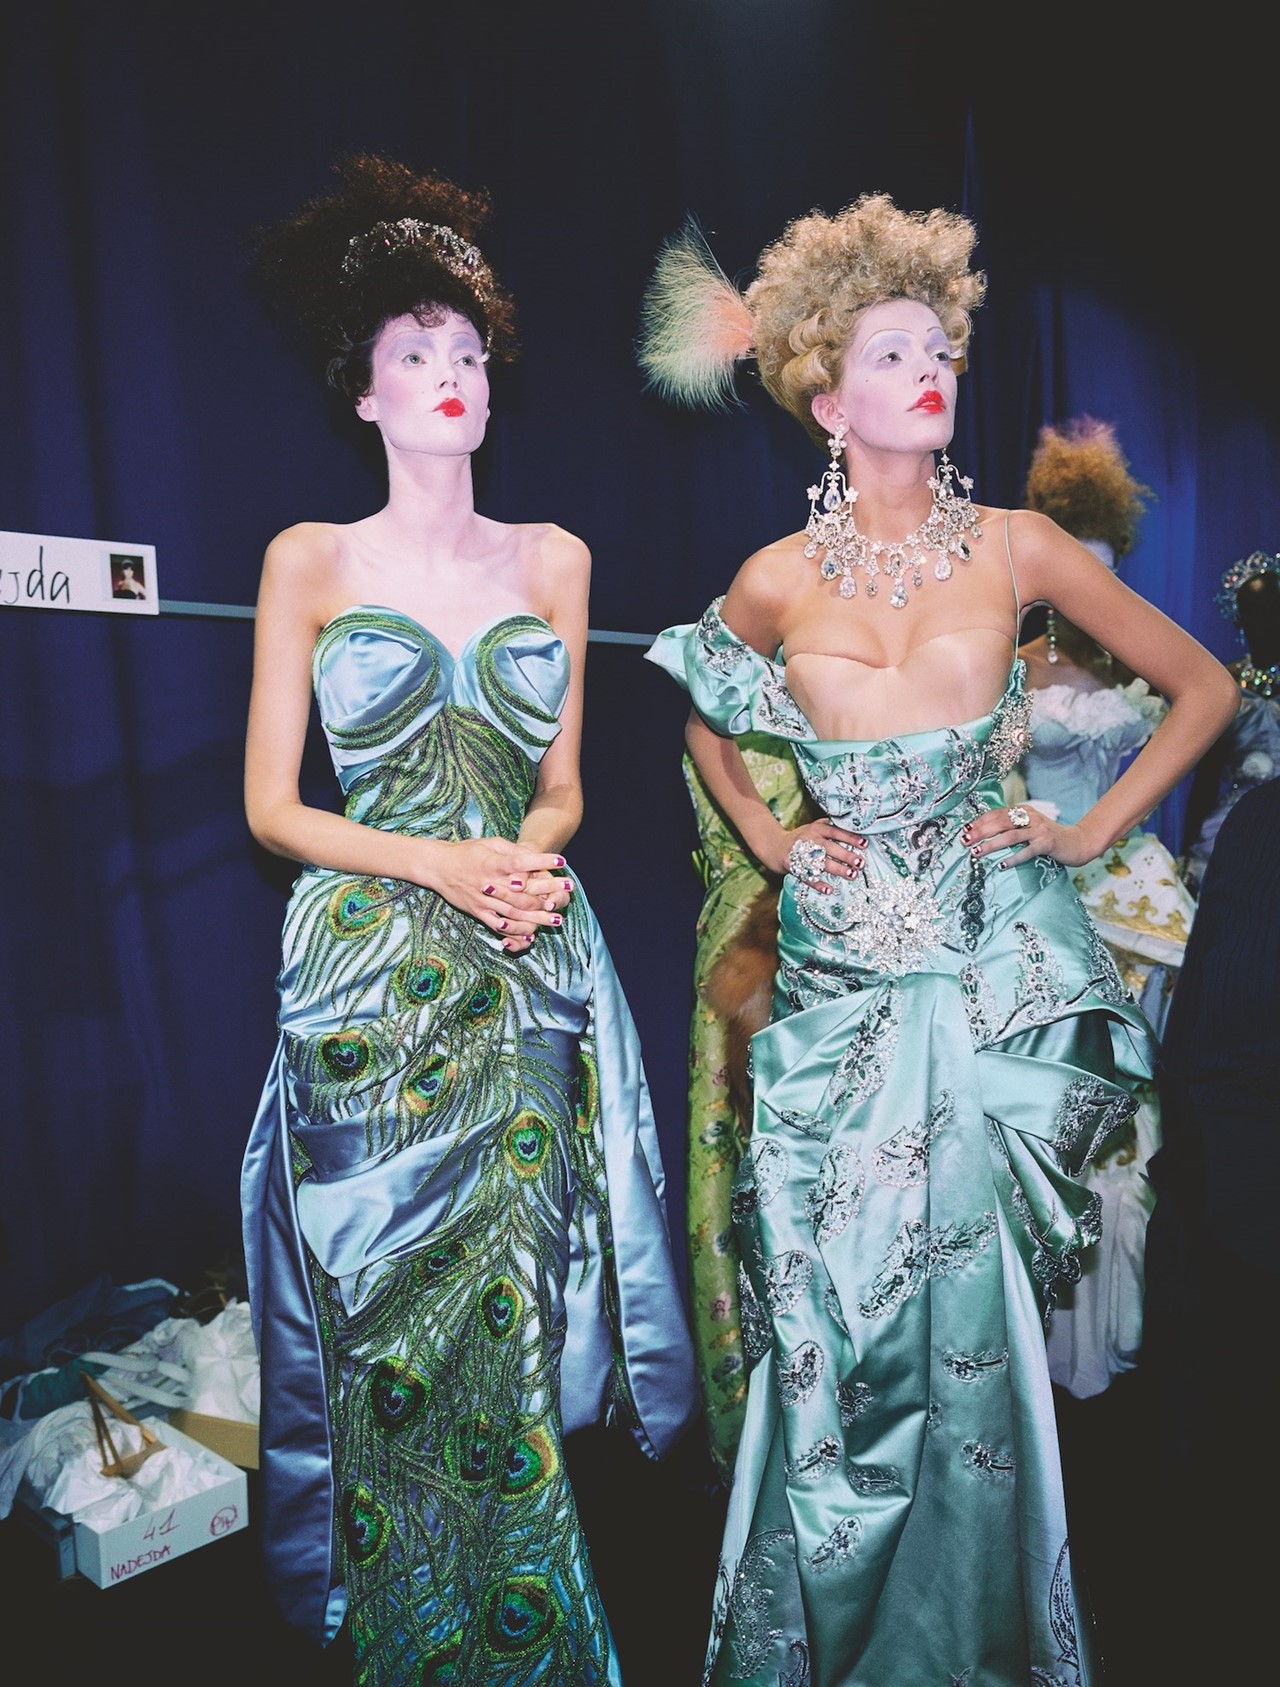 The Dior Obsessive Chronicling a Golden Decade of John Galliano